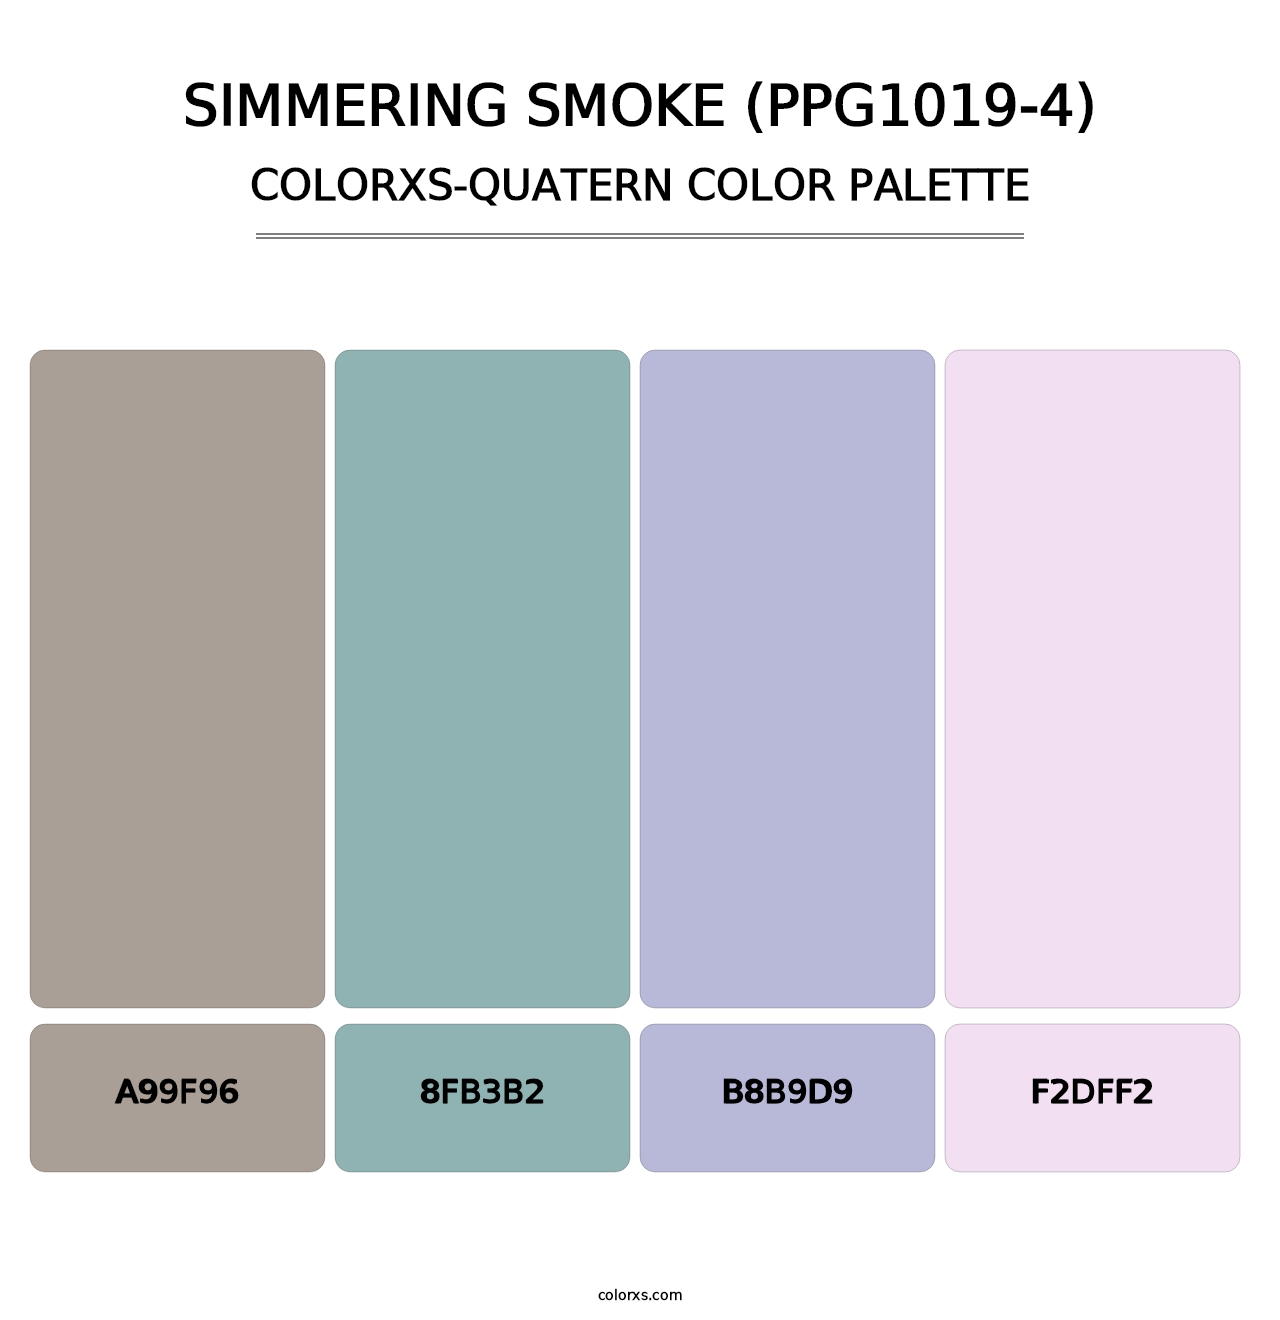 Simmering Smoke (PPG1019-4) - Colorxs Quatern Palette